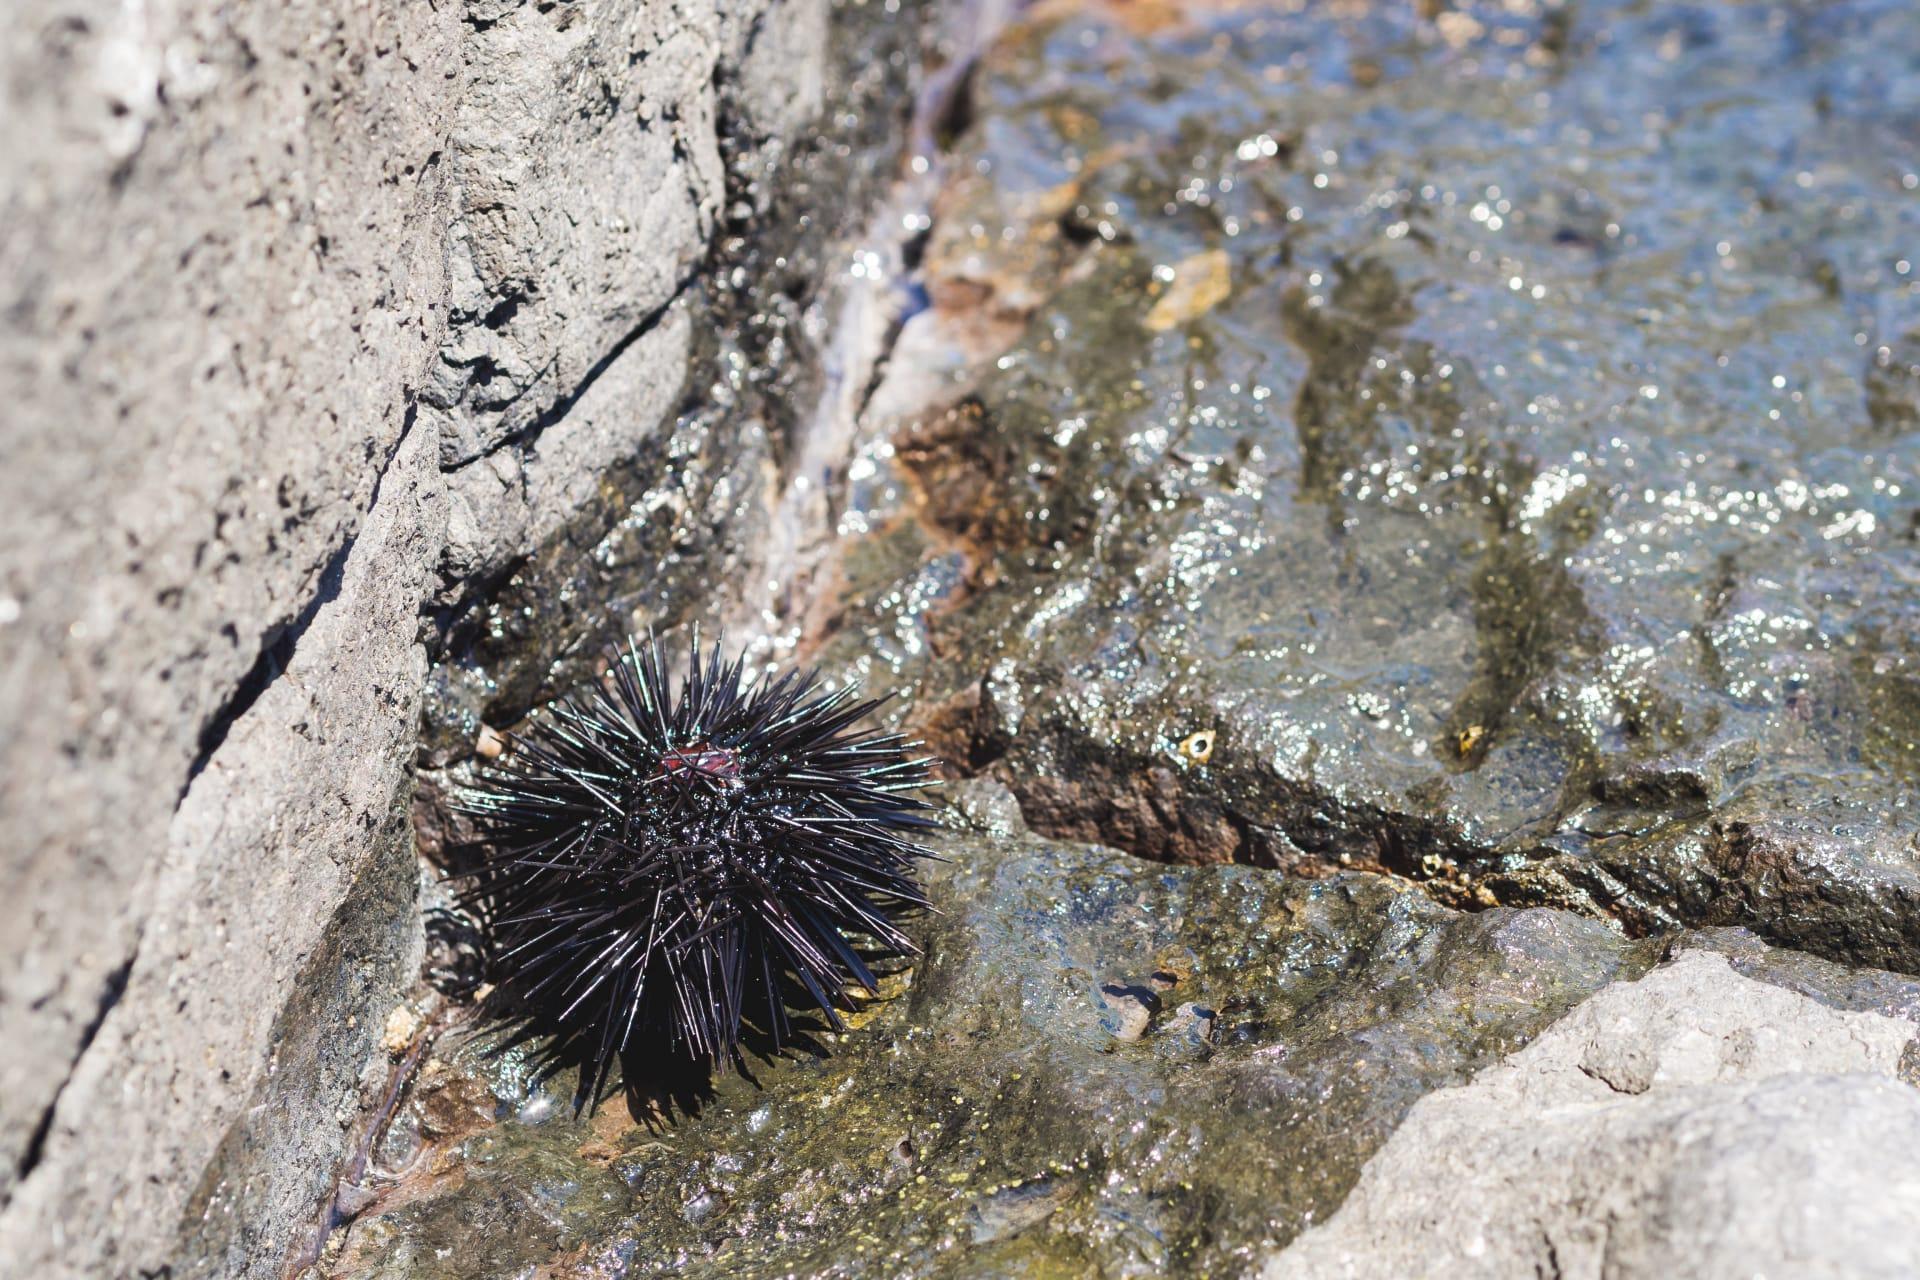 Sea urchin pictures